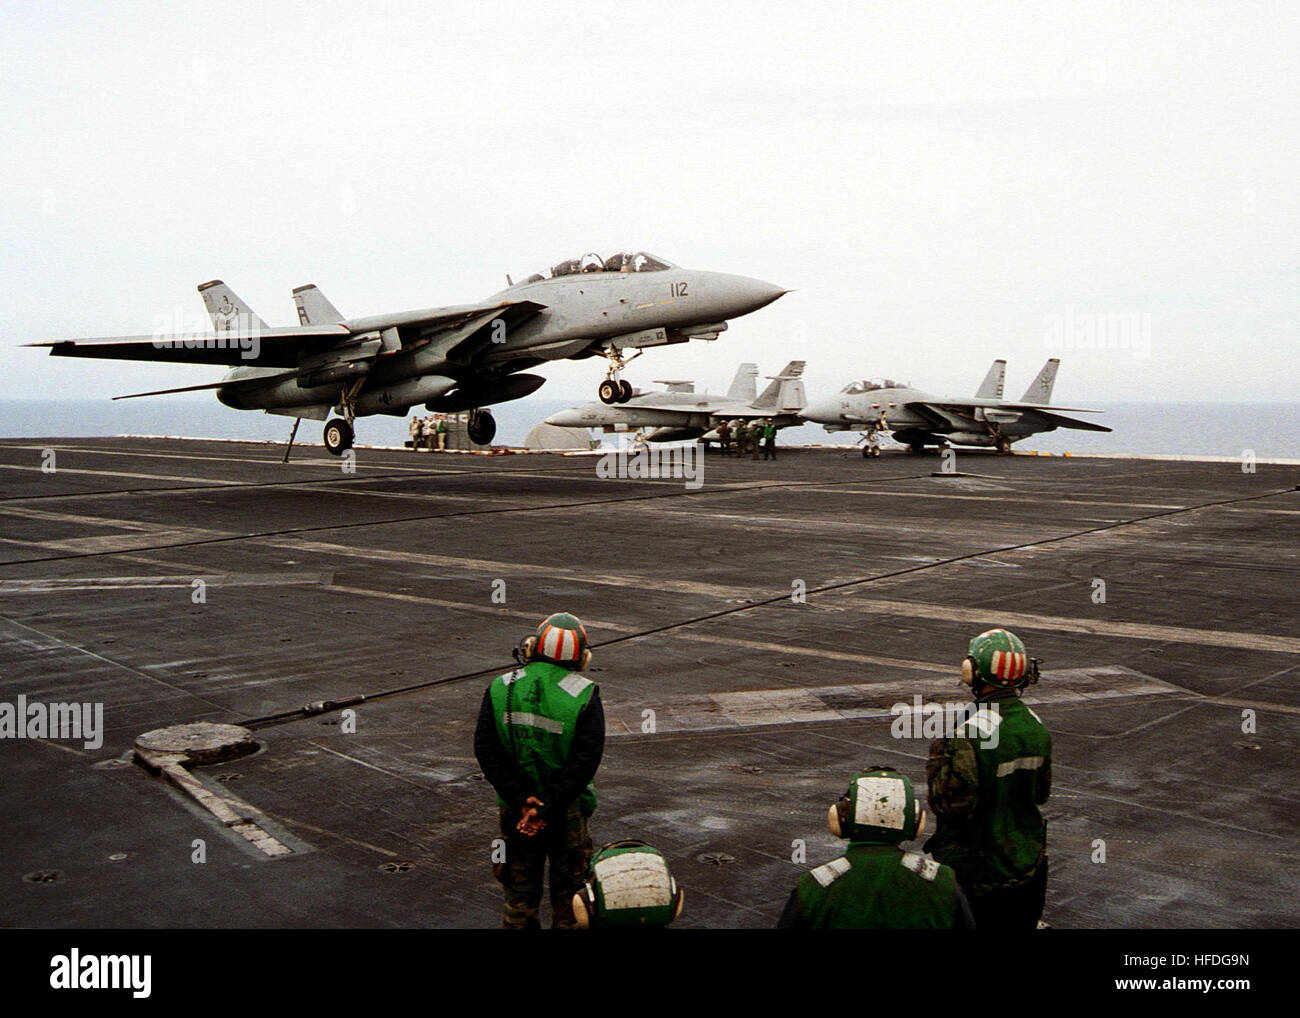 020312-N-7265D-005 At sea aboard USS Theodore Roosevelt (CVN 71) Mar. 12, 2002 -- An F-14 Tomcat jet fighter assigned to the 'Diamondbacks' of Fighter Squadron One Zero Two (VF-102) descends to make an arresting gear landing on the flight deck.  The aircraft carrier is operating in the Mediterranean Sea after conducting combat missions in support of Operation Enduring Freedom.  U.S. Navy photo by Photographer's Mate 3rd Class Sabrina A. Day.  (RELEASED) US Navy 020312-N-7265D-005 F-14 Stock Photo